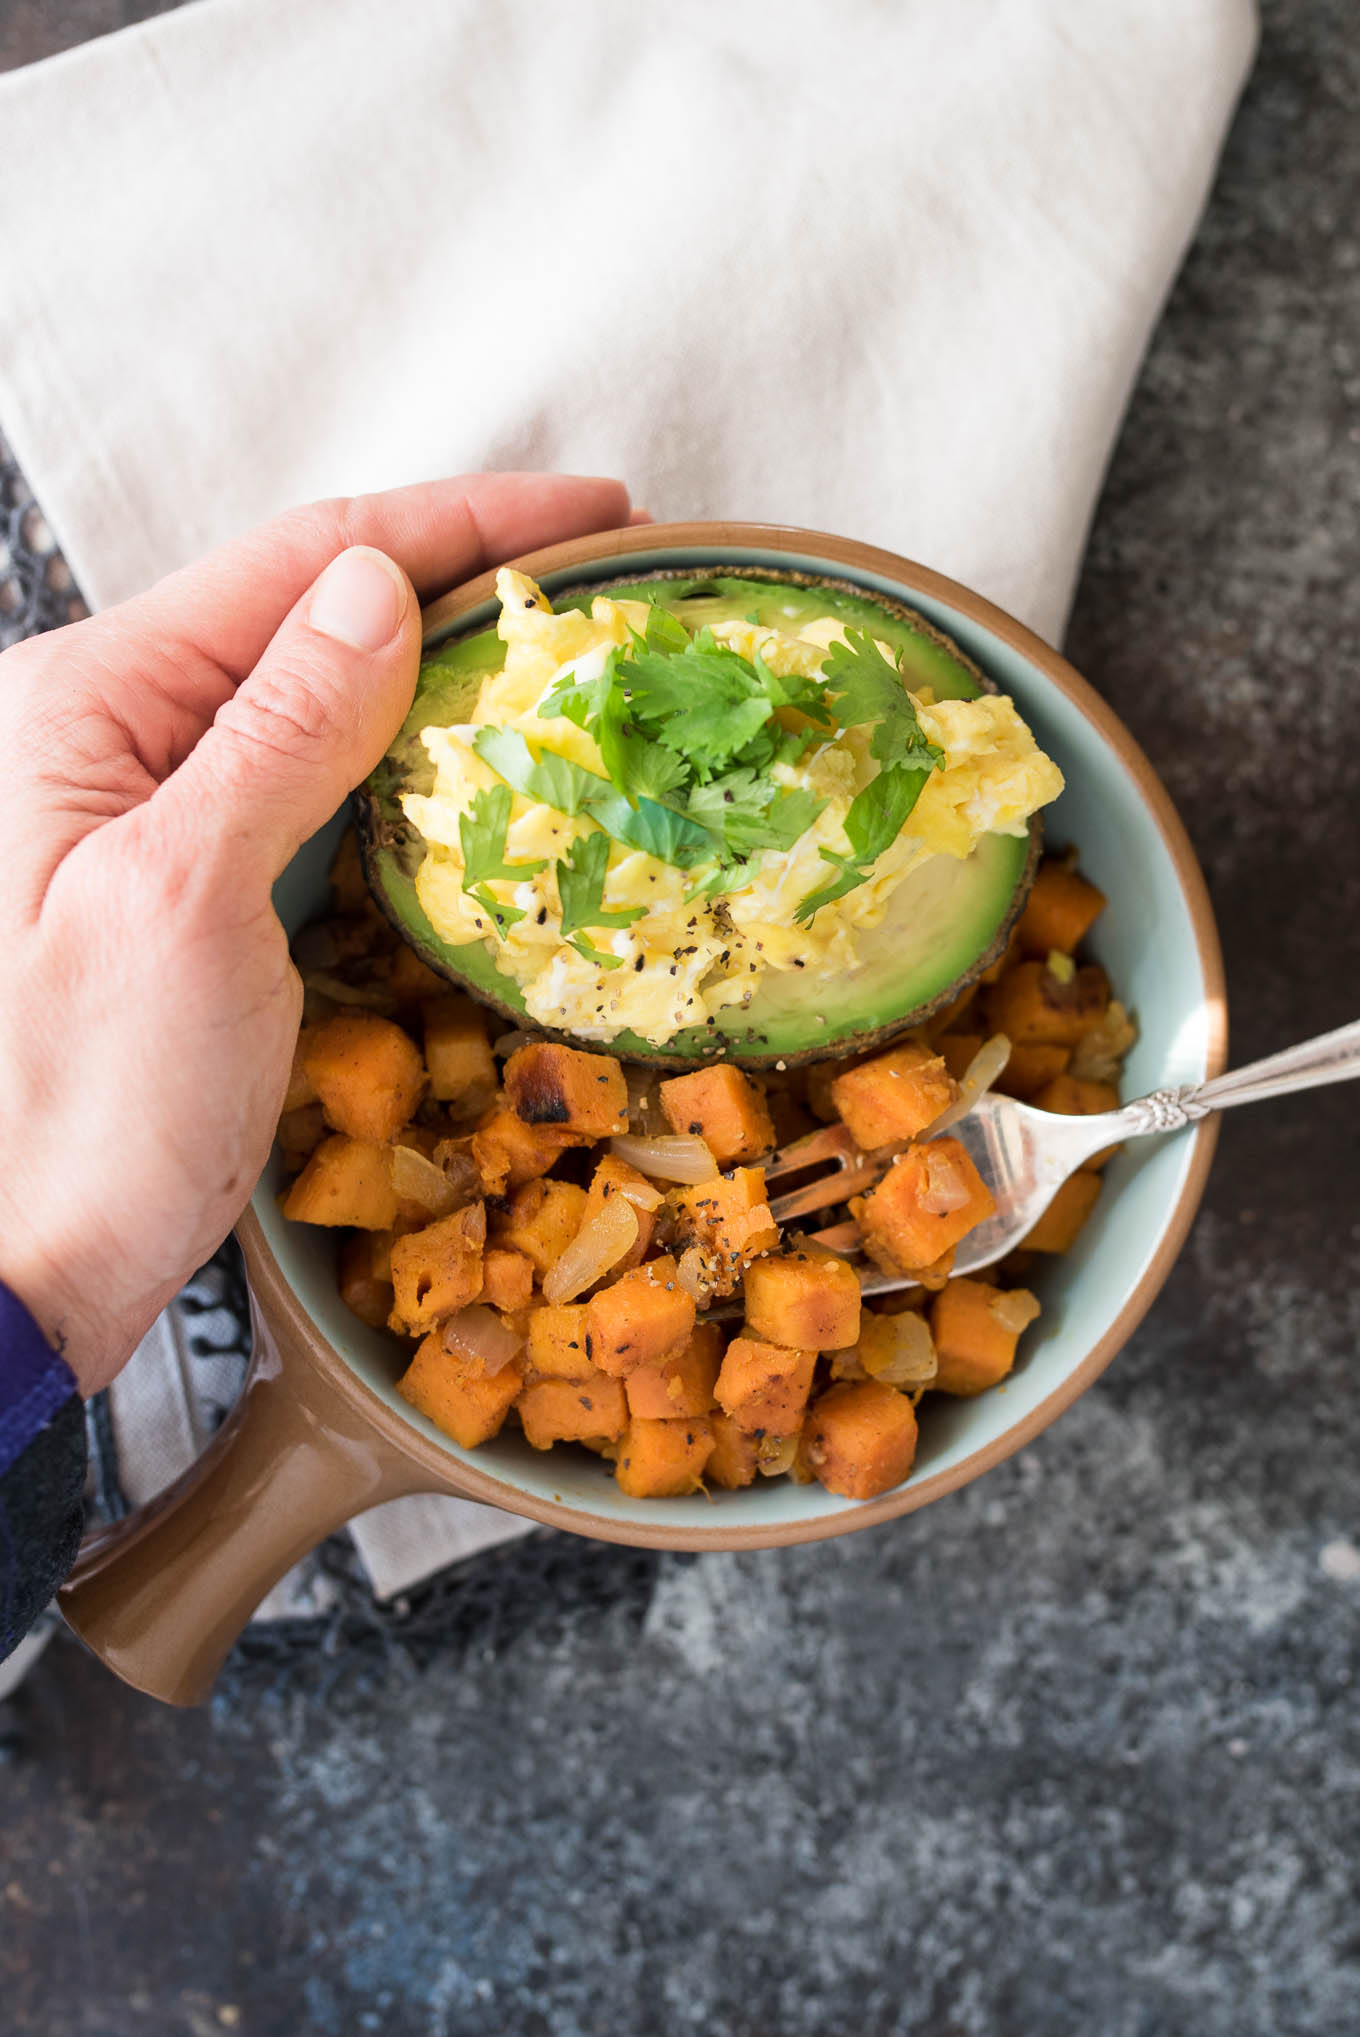 Spiced Sweet Potato Hash with Avocado and Eggs is naturally gluten free, high in fiber and protein and is a budget friendly meal that will nourish you inside and out!